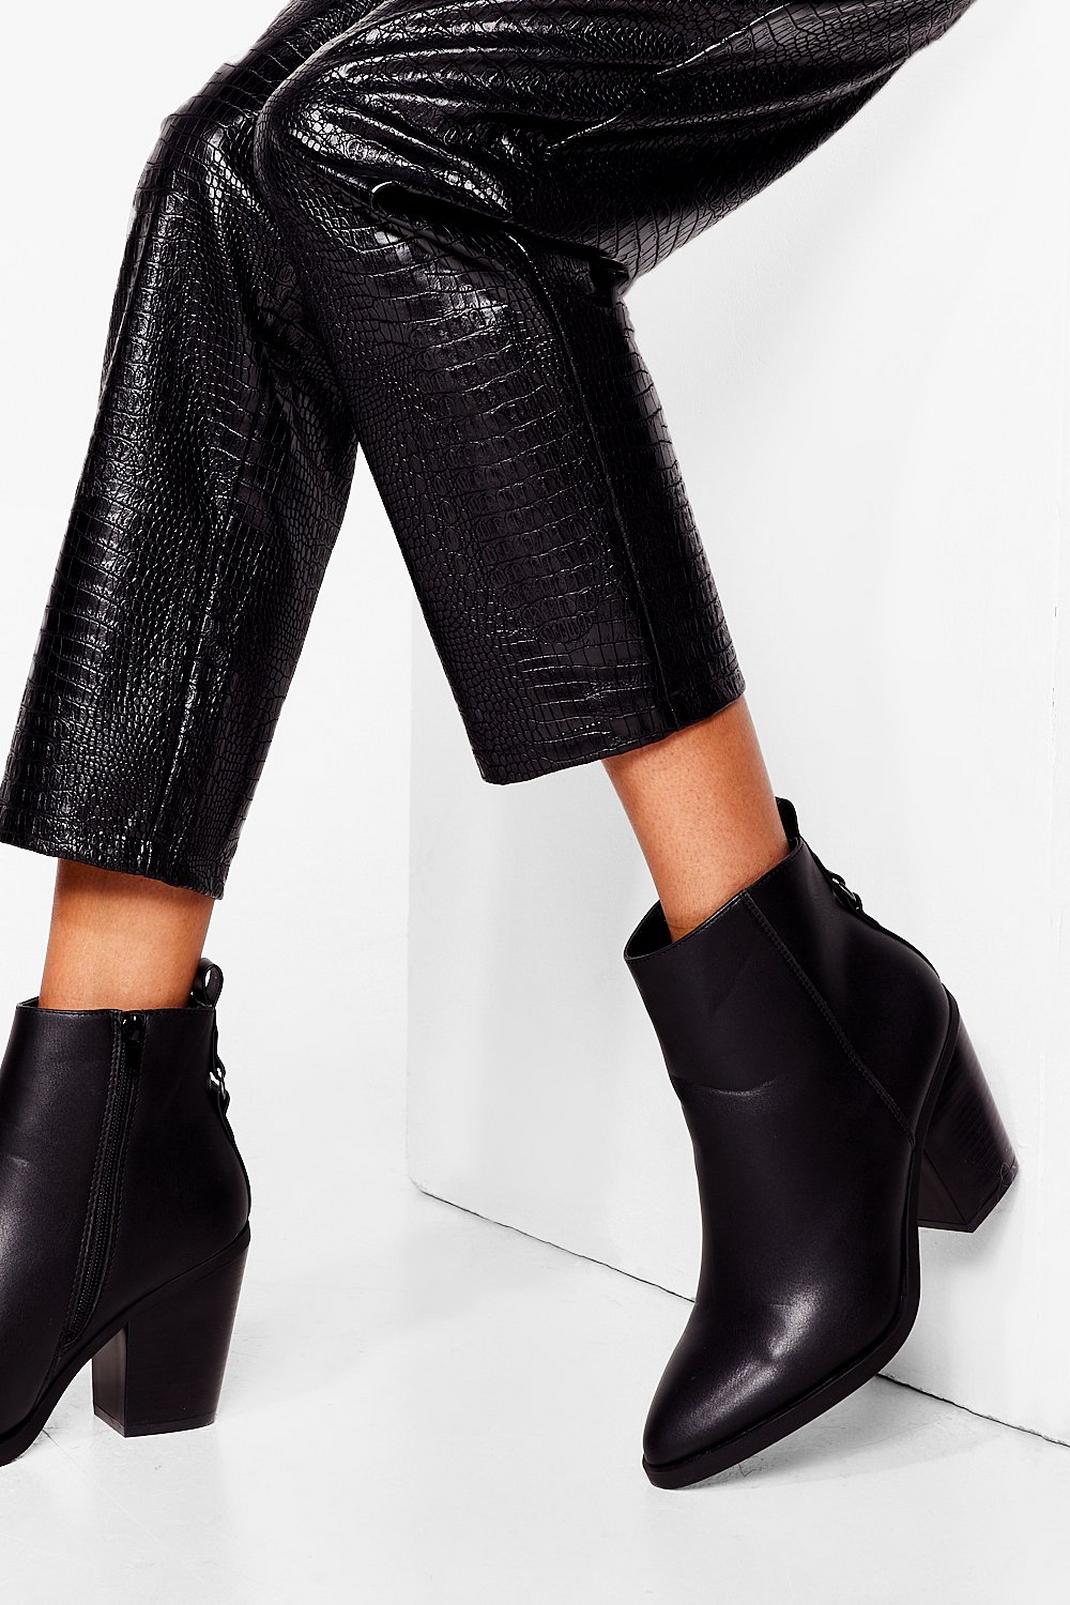 Black Hope For the West Heeled Ankle Boots image number 1